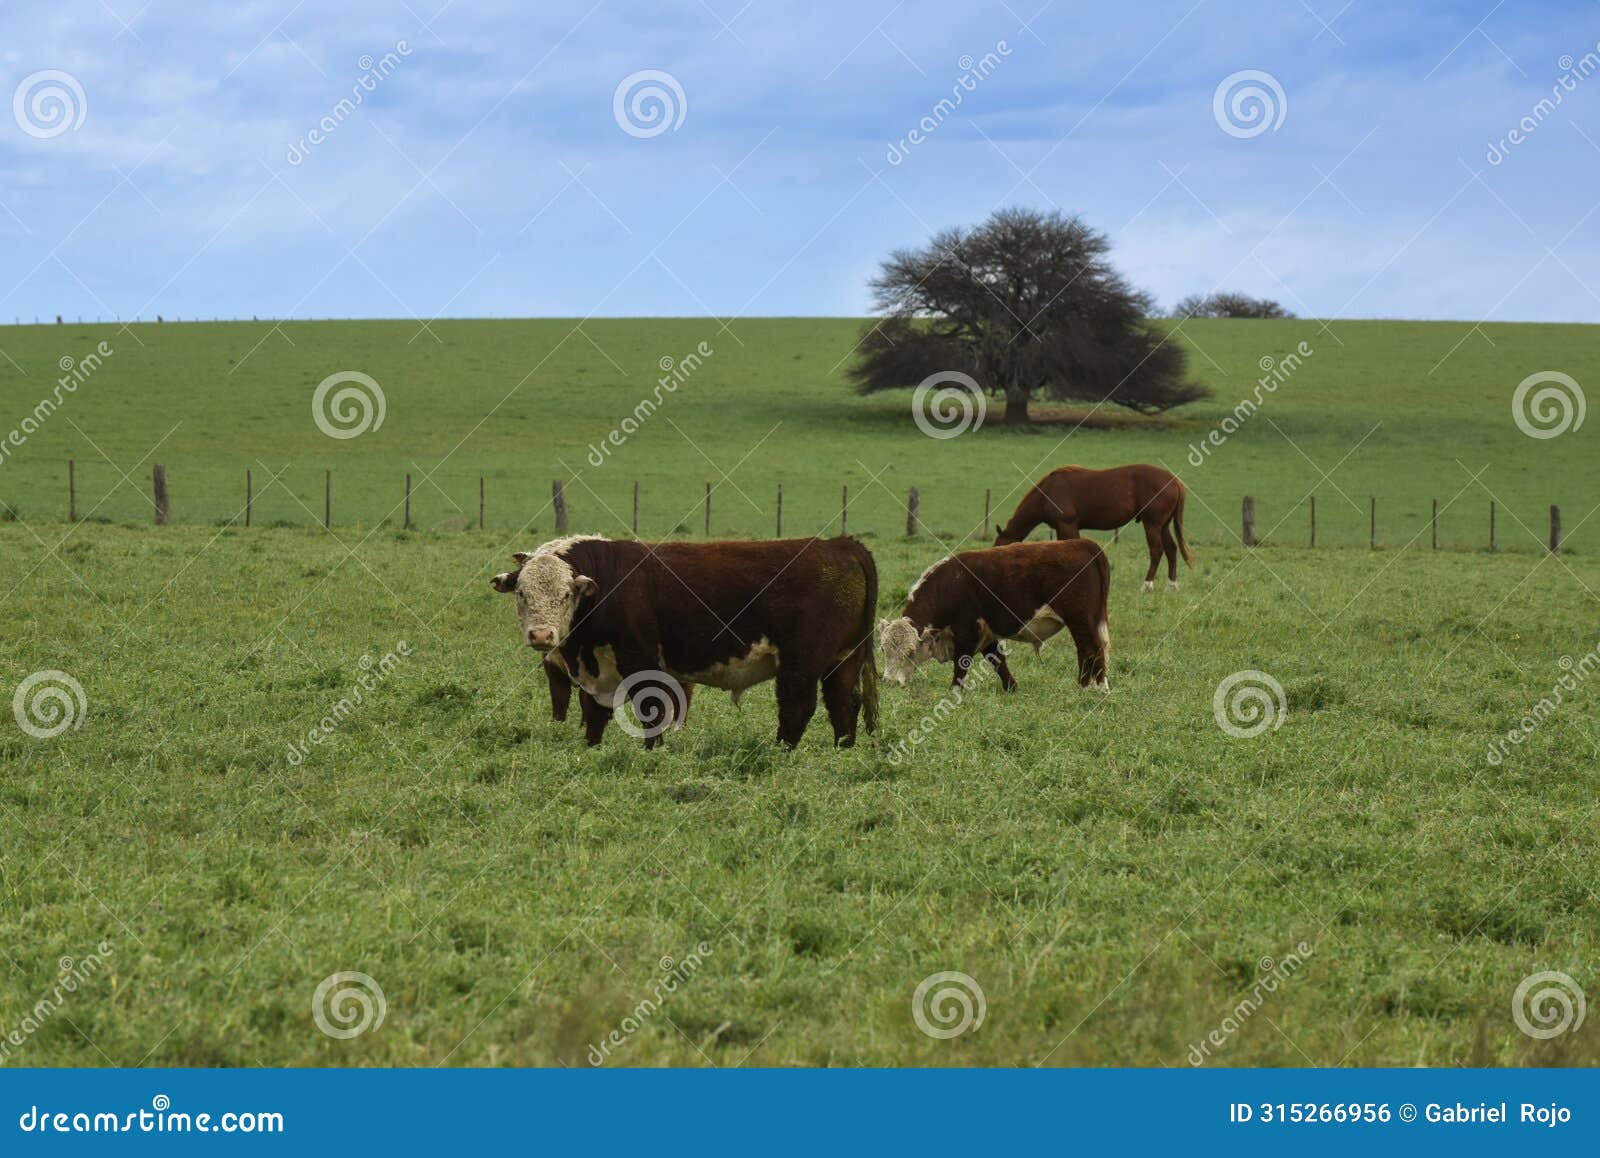 cows in the argentine countryside, la pampa,